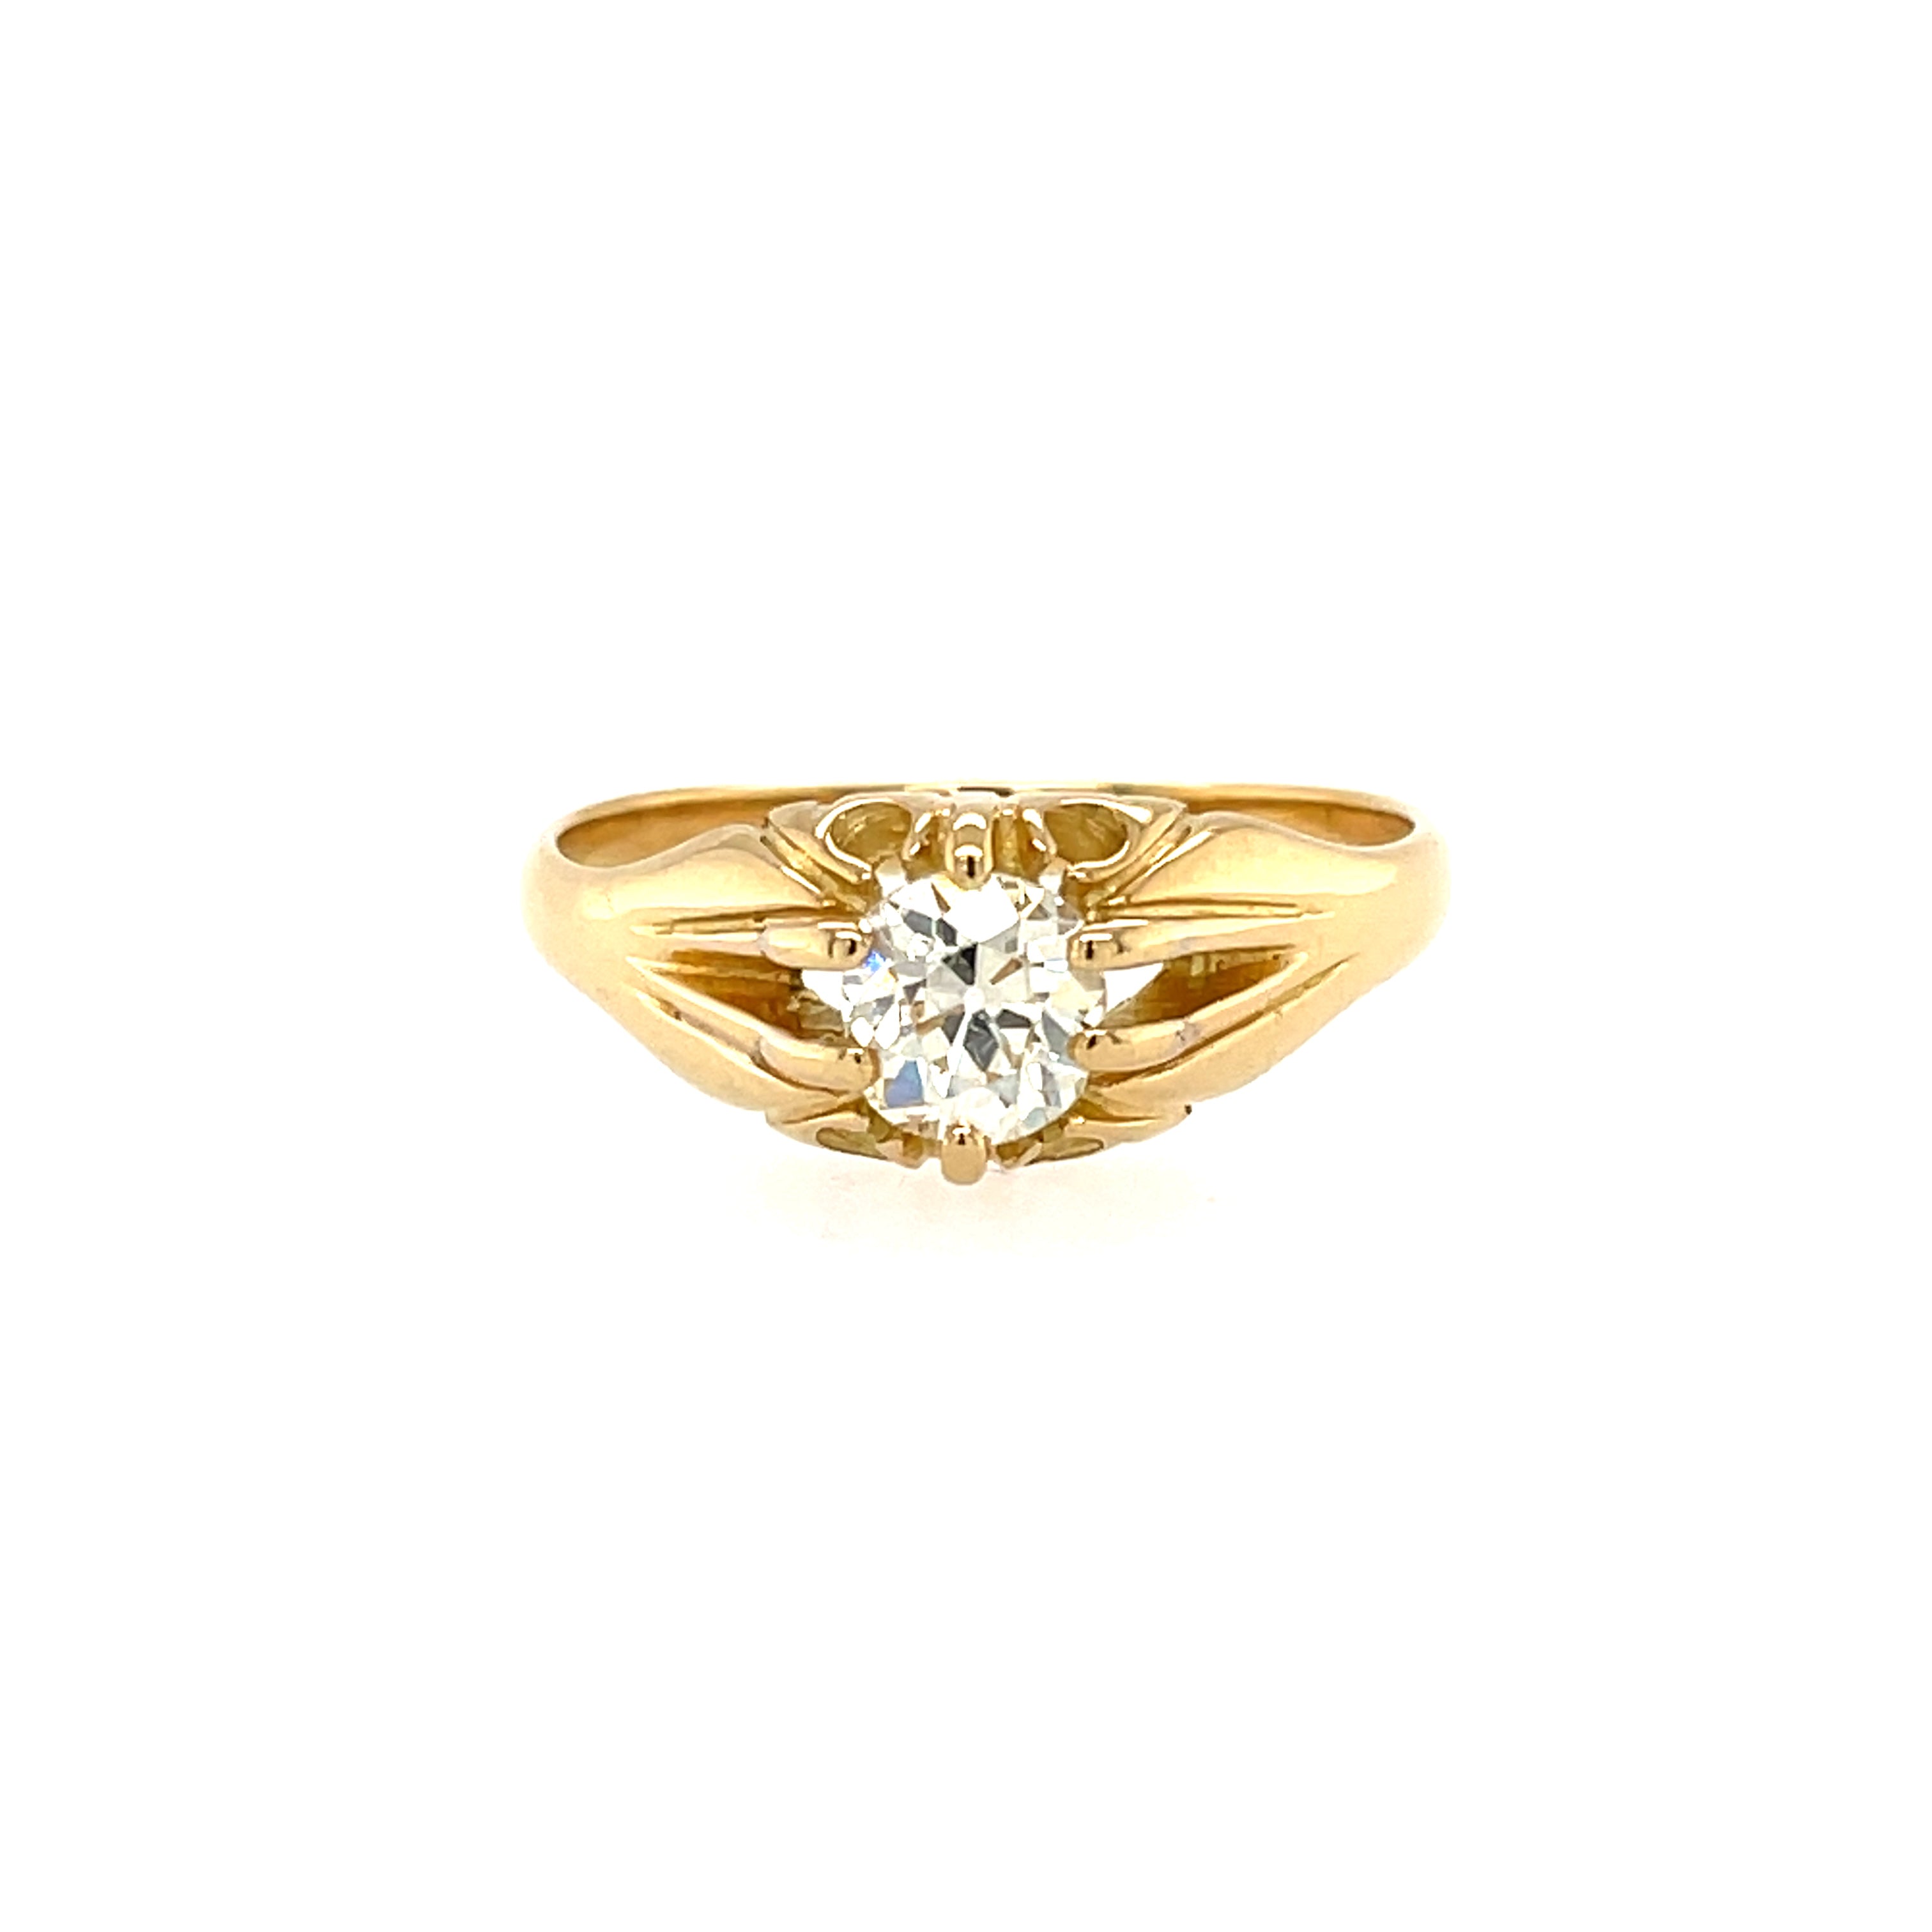 18ct Yellow Gold 0.91ct Old European Cut Diamond Solitaire Gypsy Ring Certified M VS